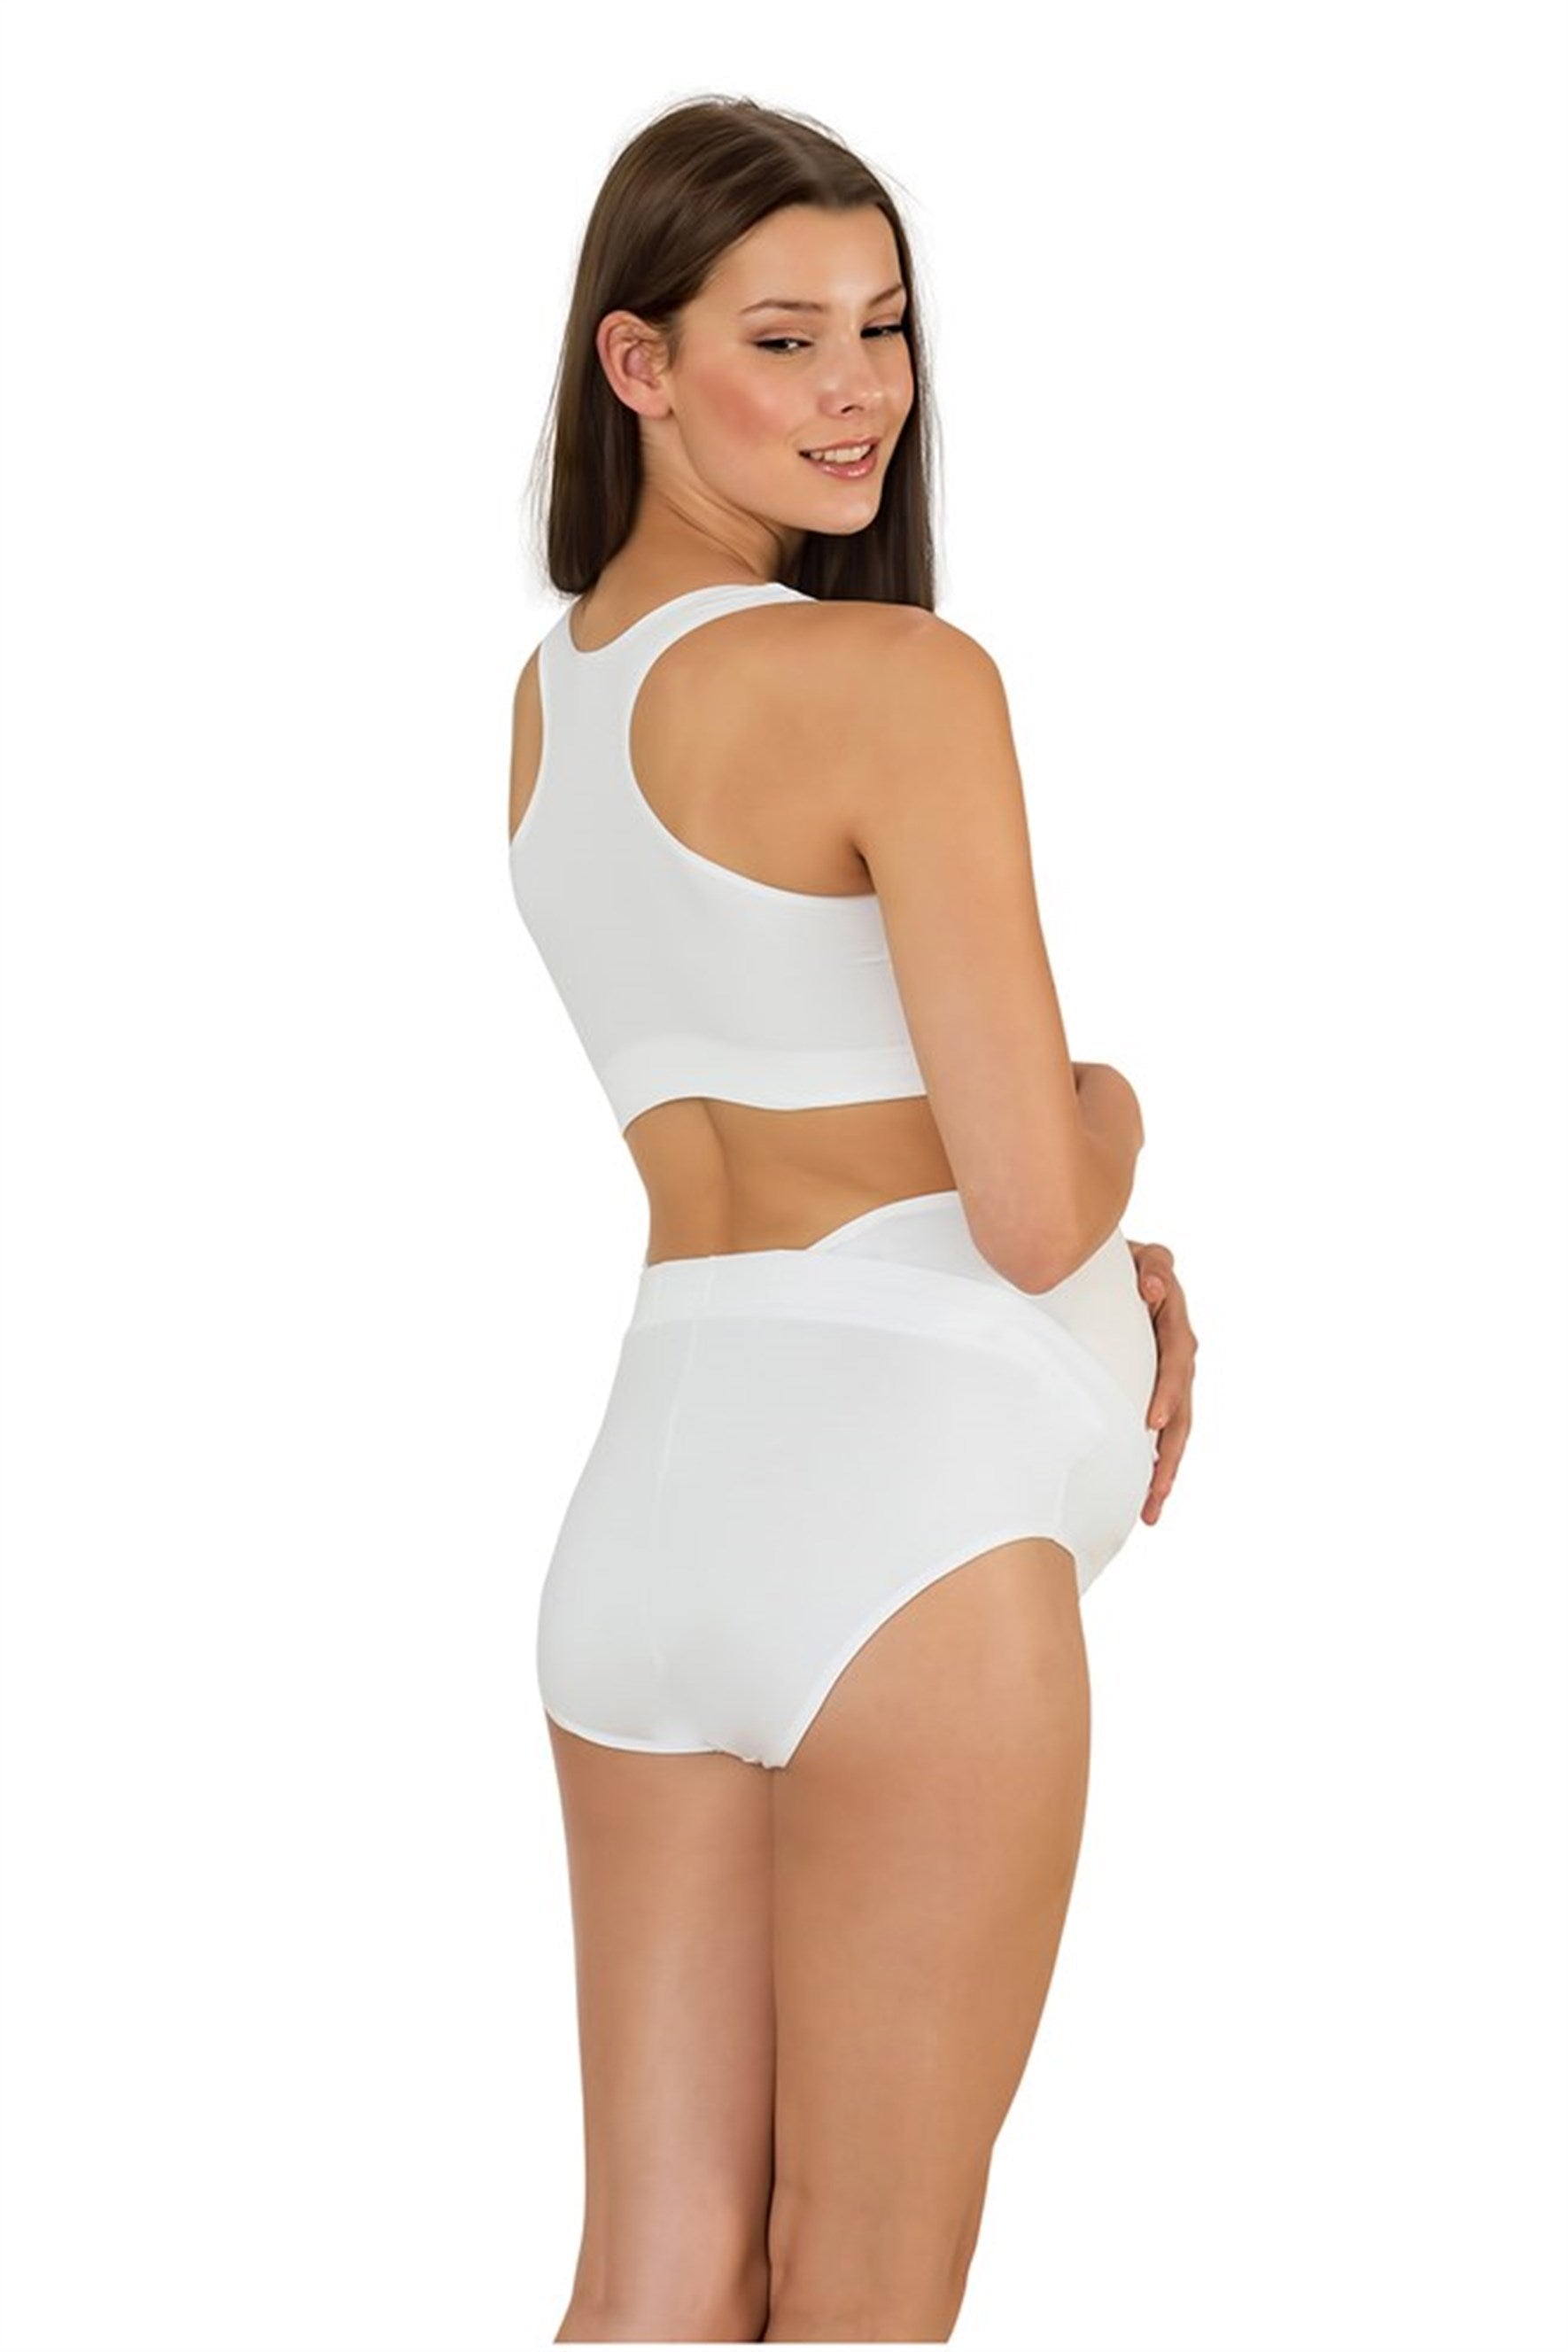 Shopymommy 2825 Abdominal Support Belt Maternity Panties